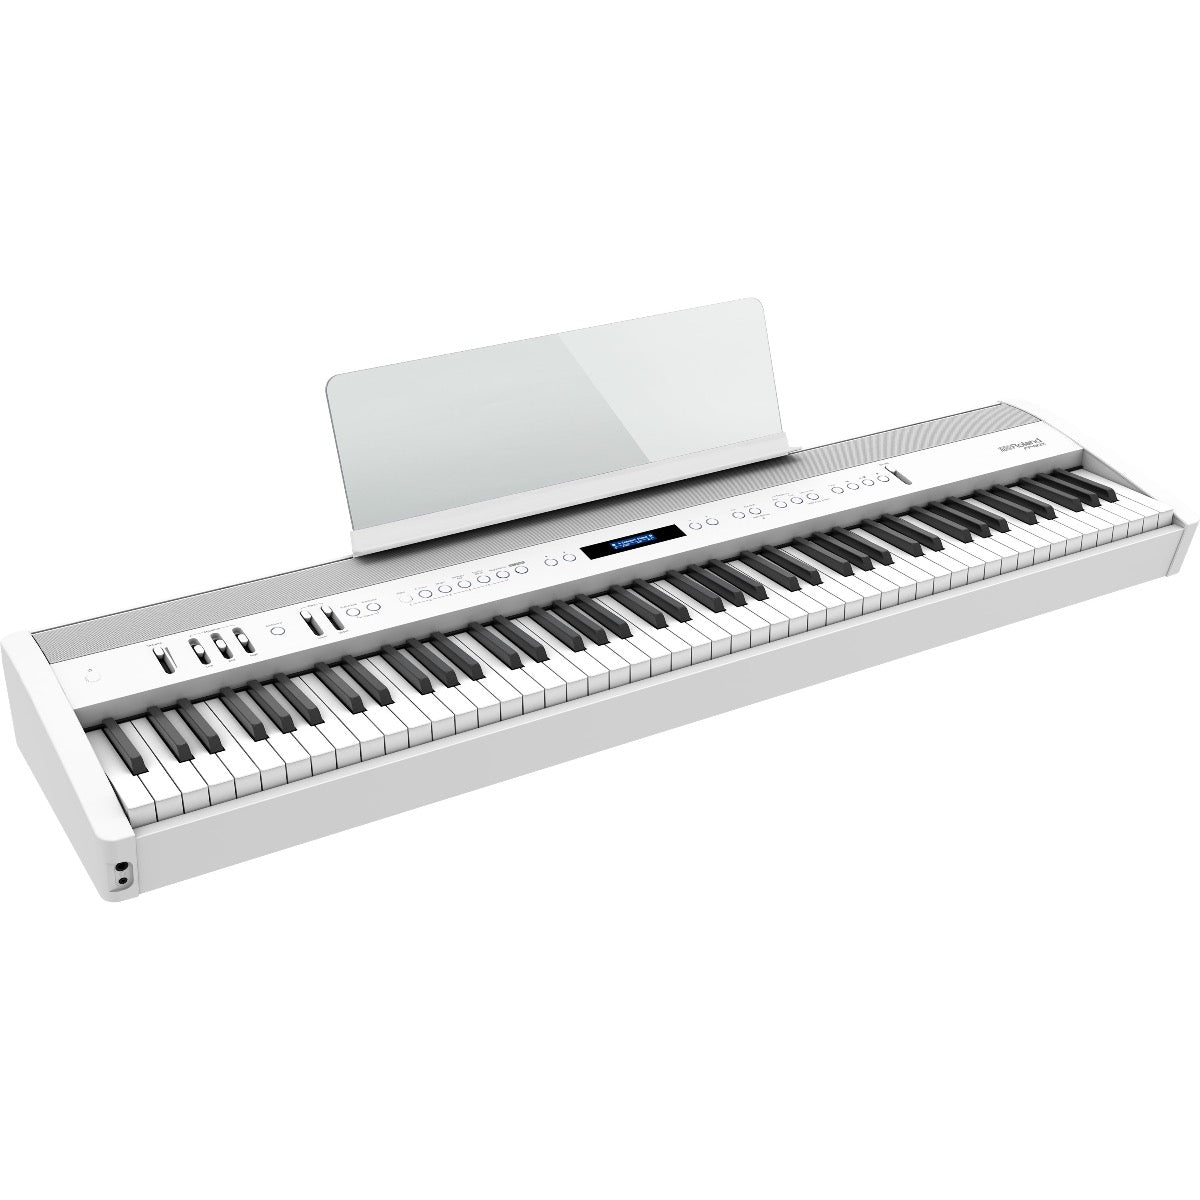 3/4 view of Roland FP-60X Digital Piano - White with music rest attached showing top, front and left side